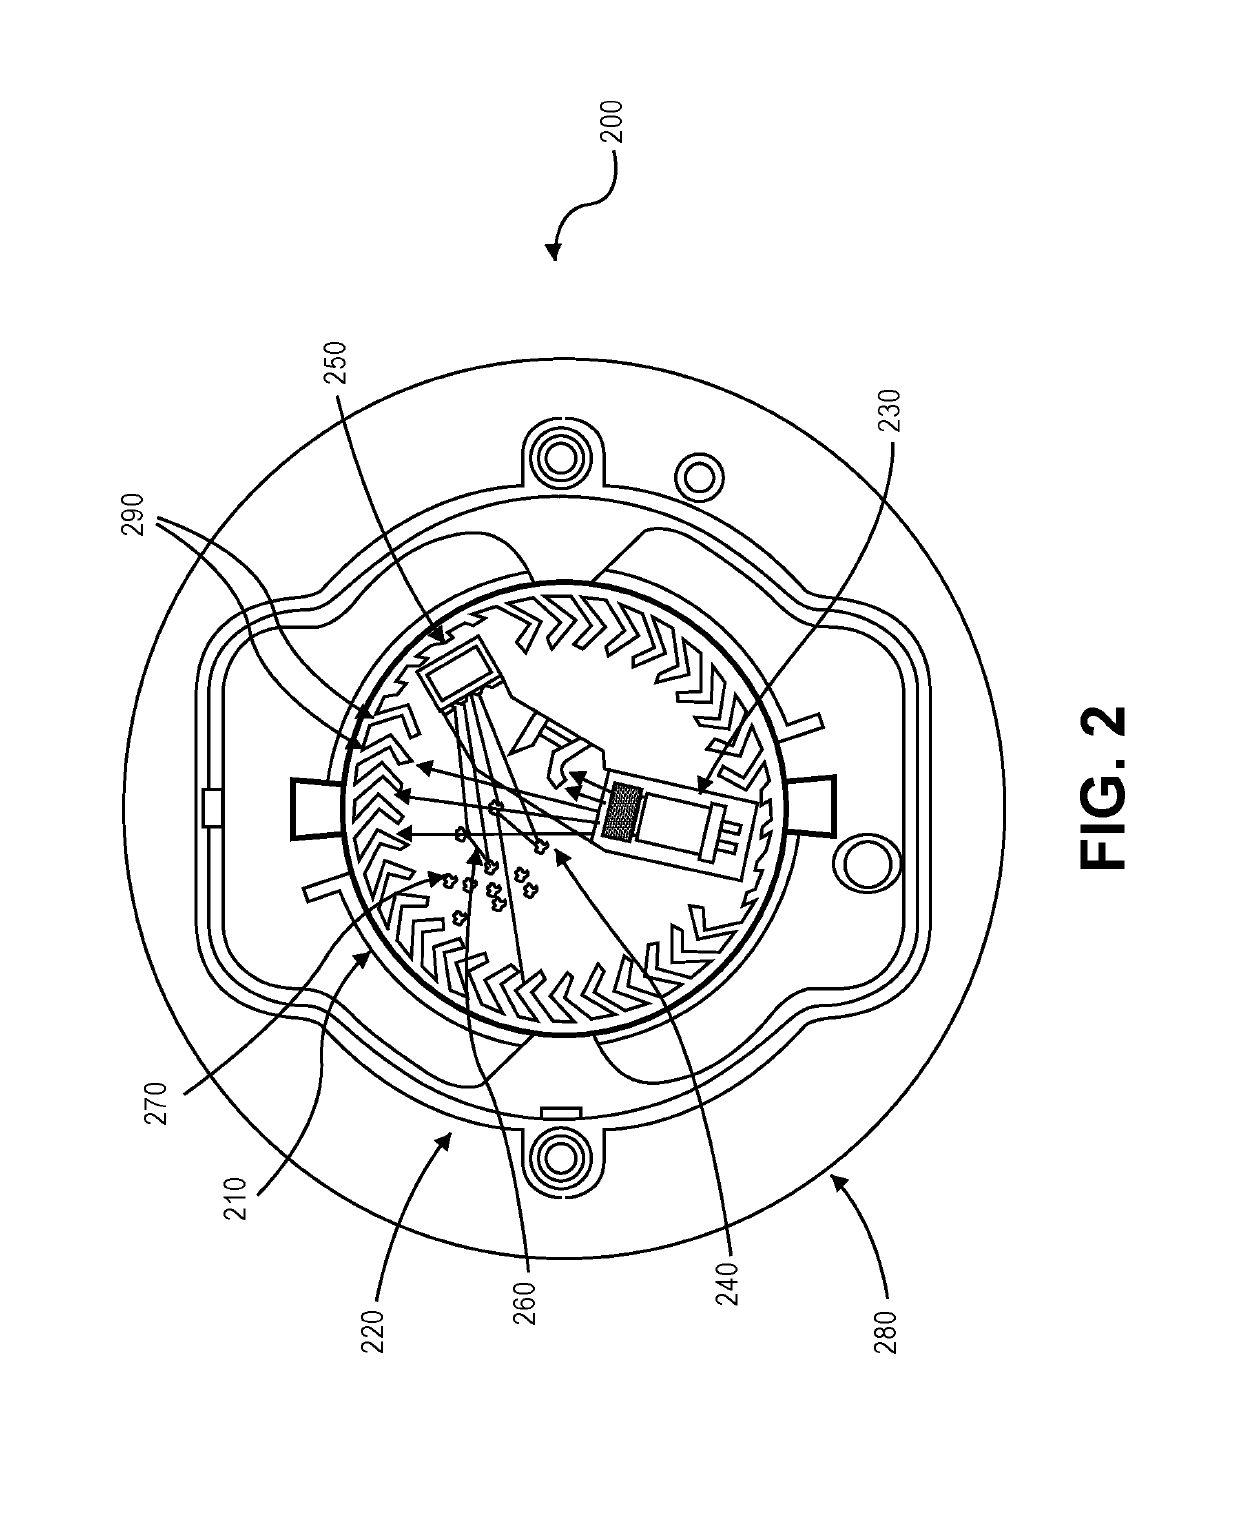 Compact optical smoke detector system and apparatus